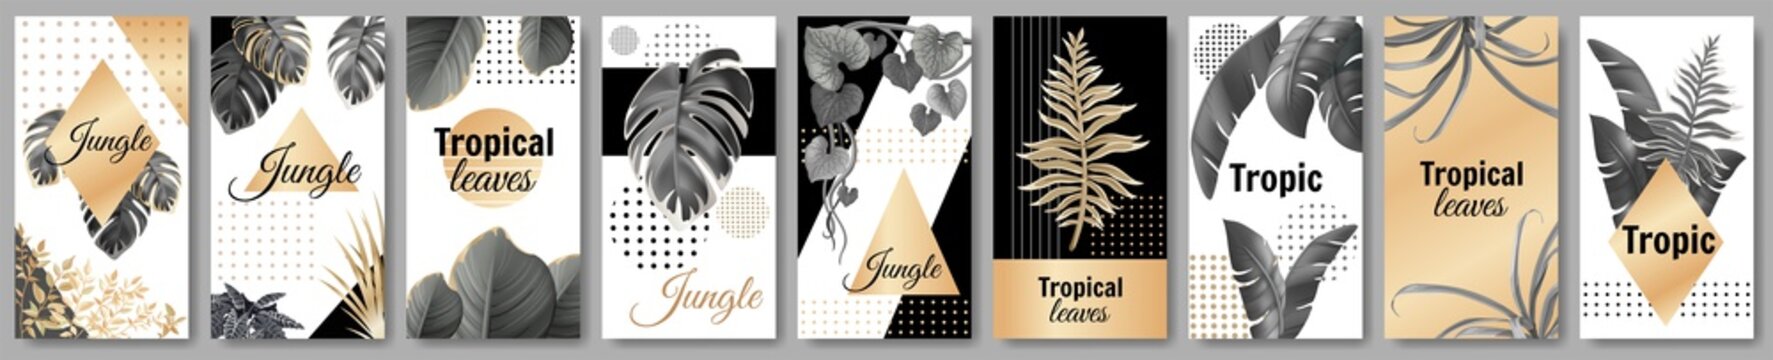 Set template banners dark and gold leaves of tropical exotic plants. Flyers jungle with palm trees and lianas. Vector 3d illustration with space for text.